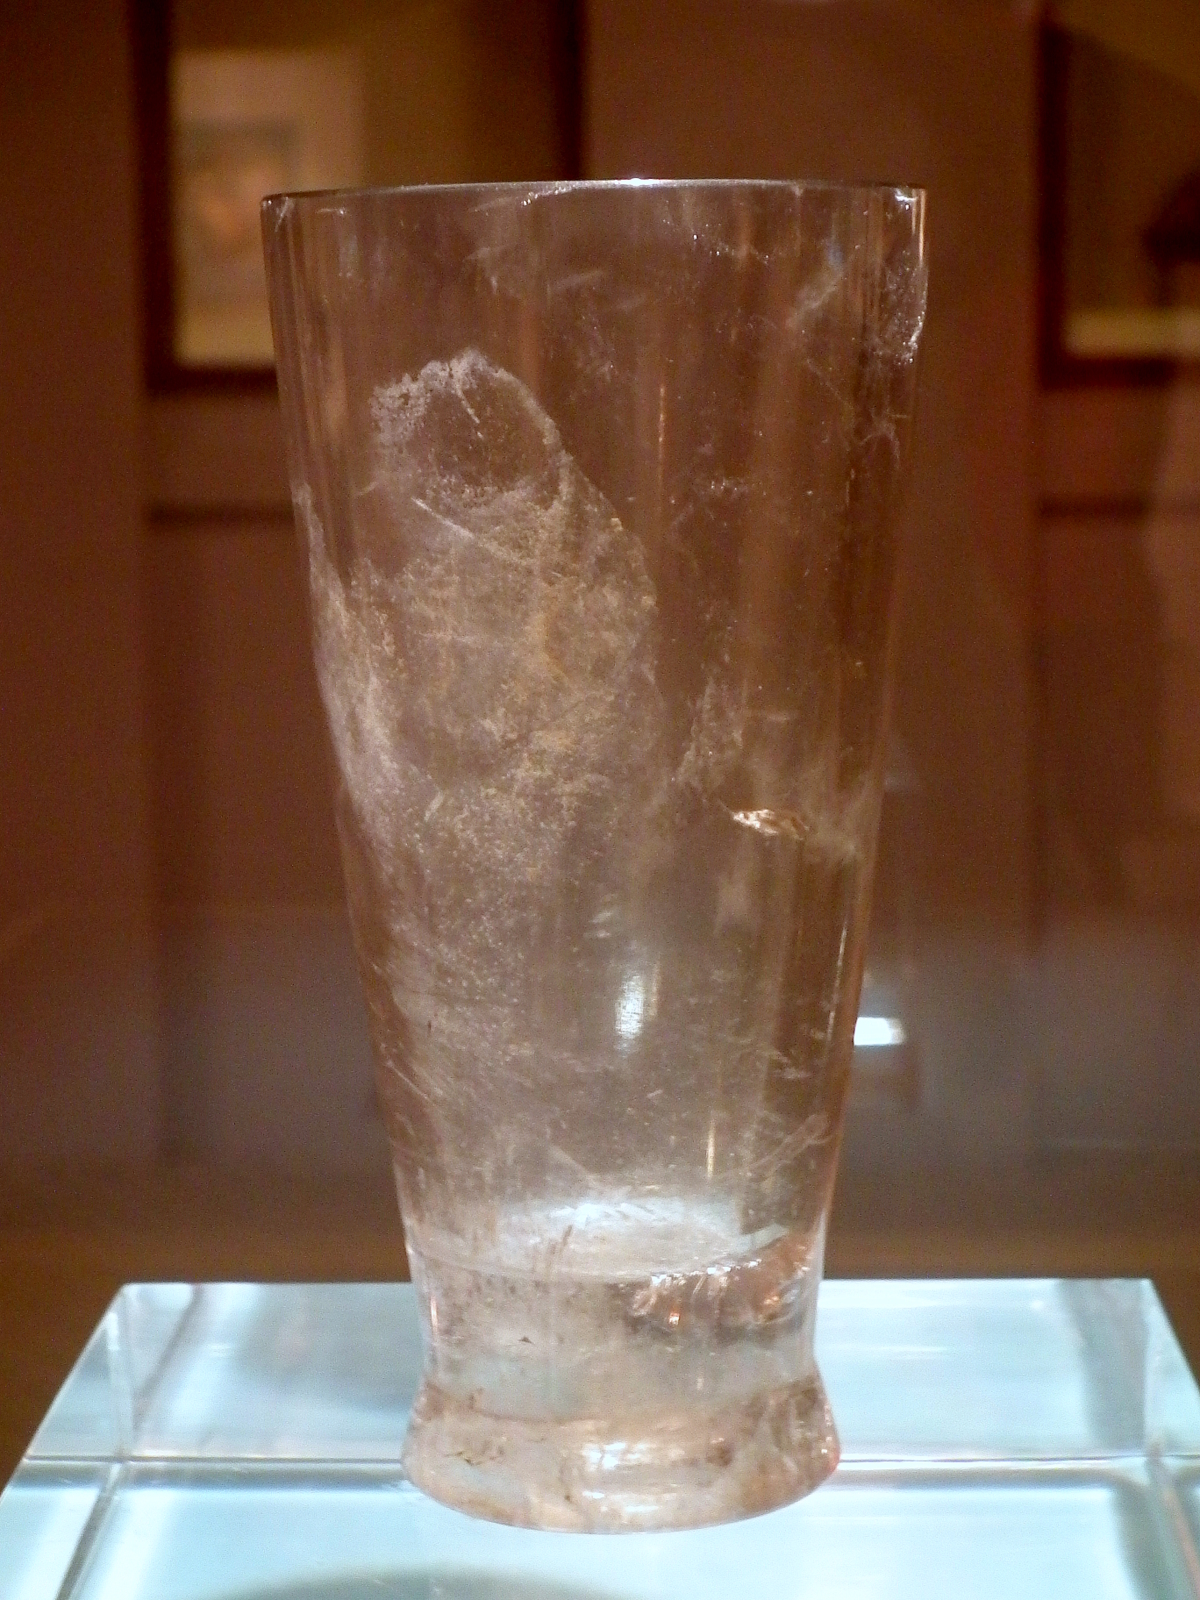 https://upload.wikimedia.org/wikipedia/commons/9/99/Crystal_Cup%28Warring_States_Period%29_in_Hangzhou_Museum.JPG